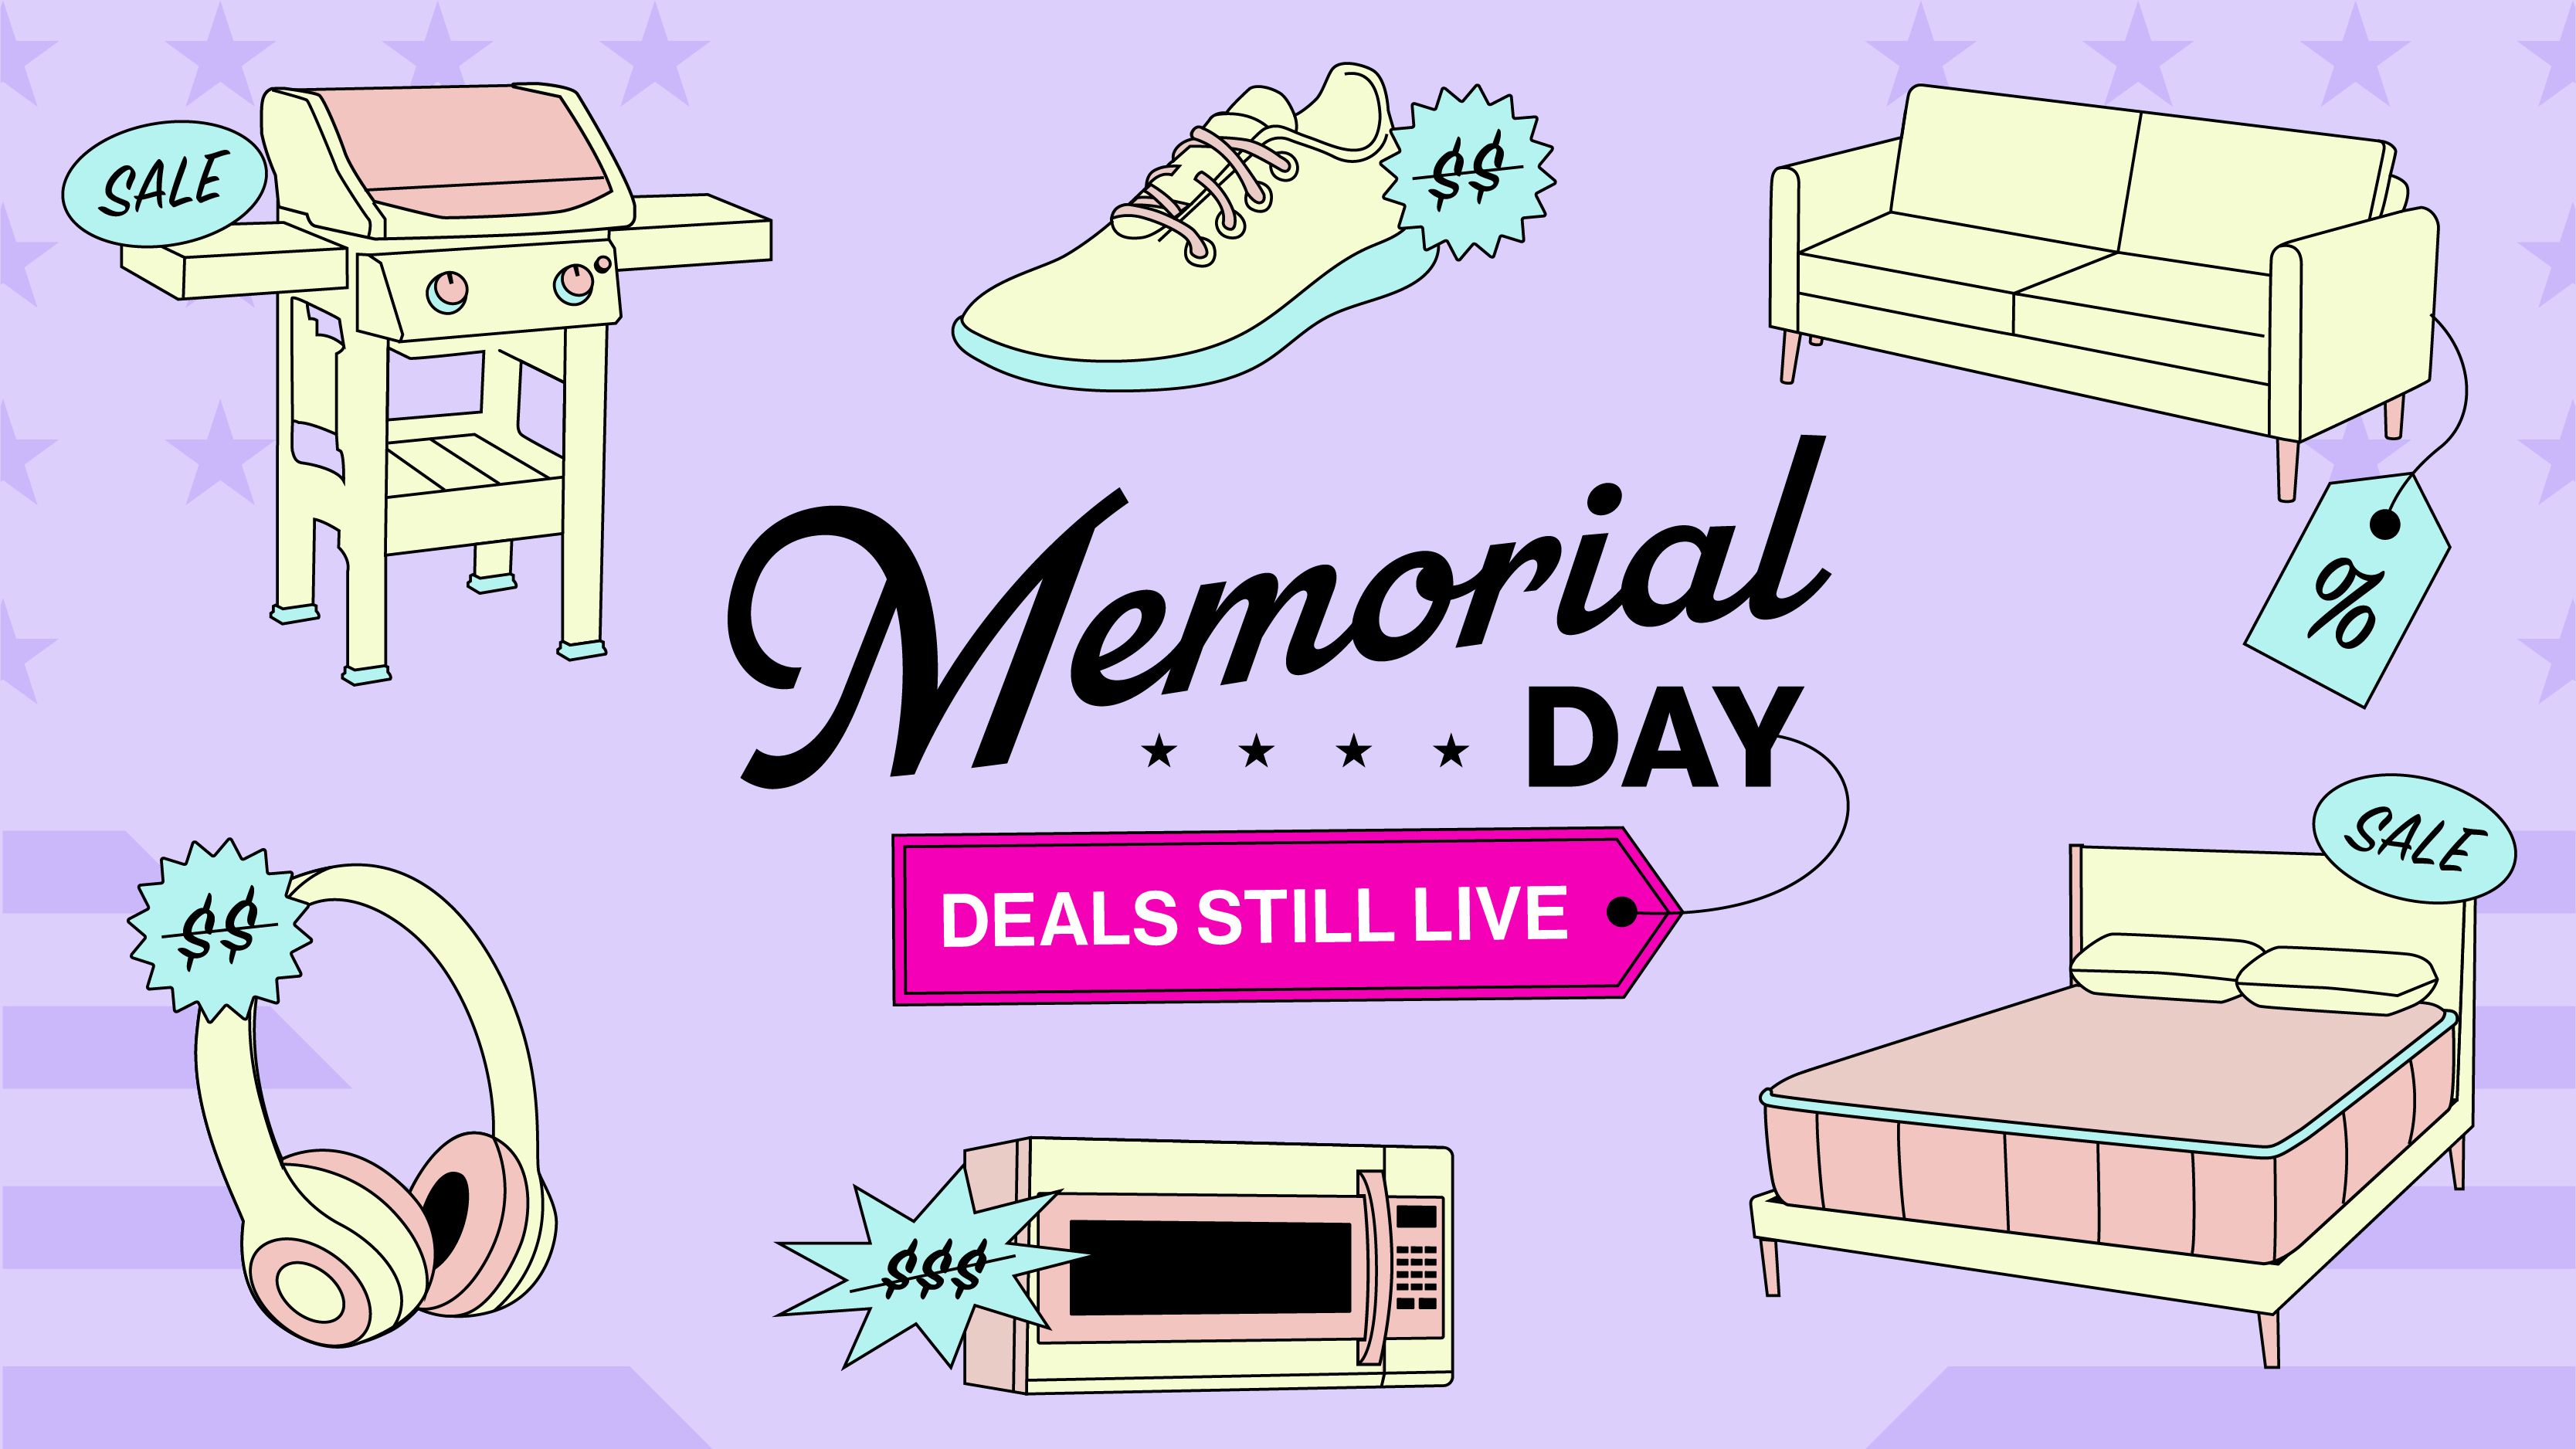 Live now: Best Prime Day Lightning Deals to shop before they're gone